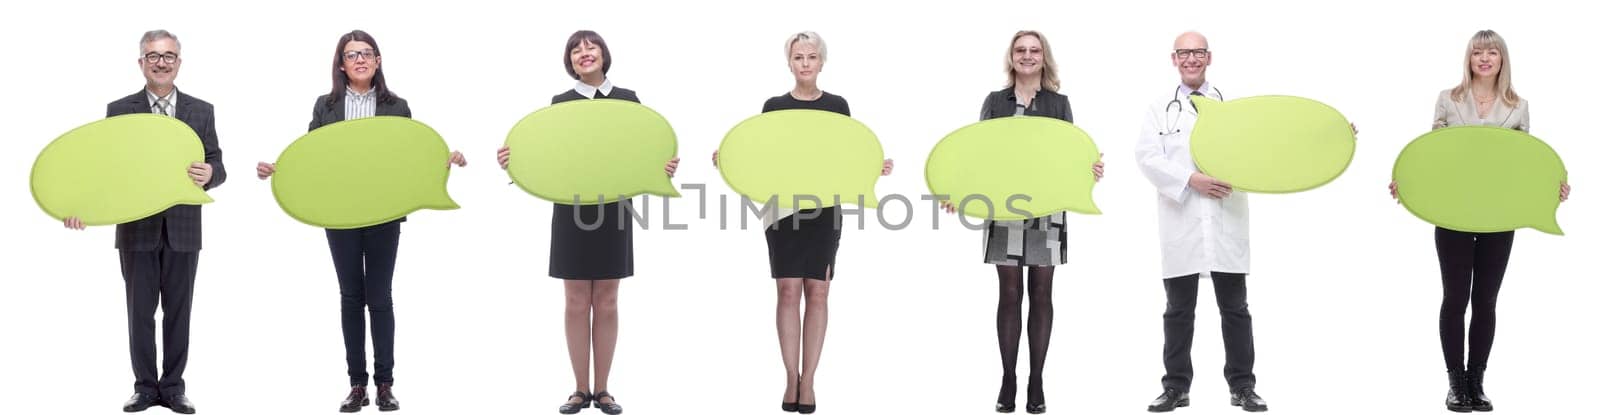 group of successful business people with comments isolated on white background